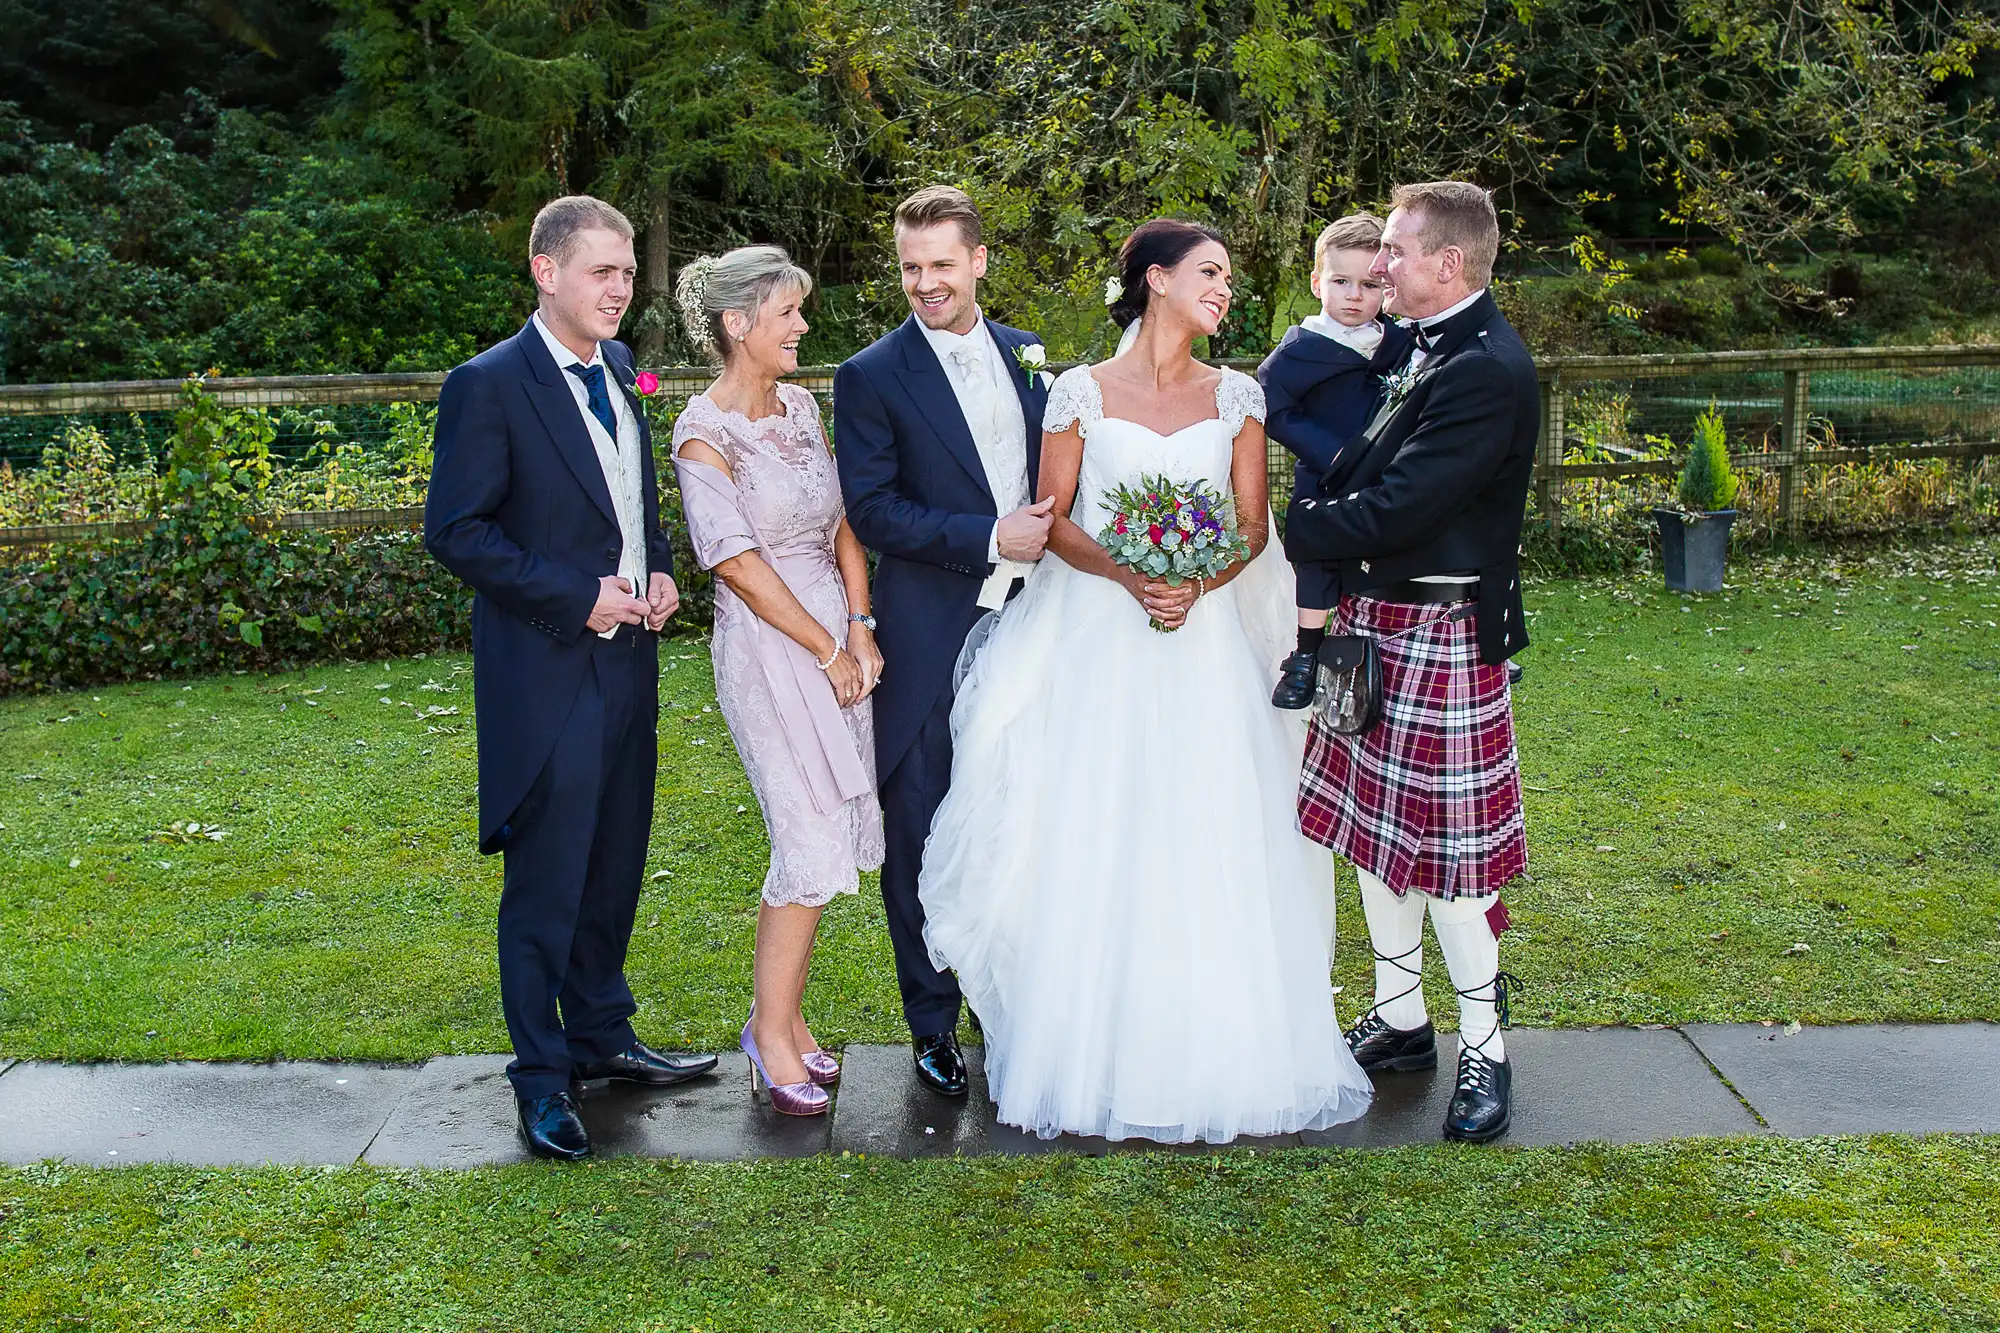 A wedding photo featuring three men and two women, including a bride in a white gown and a man in a kilt, standing on grass with trees in the background.